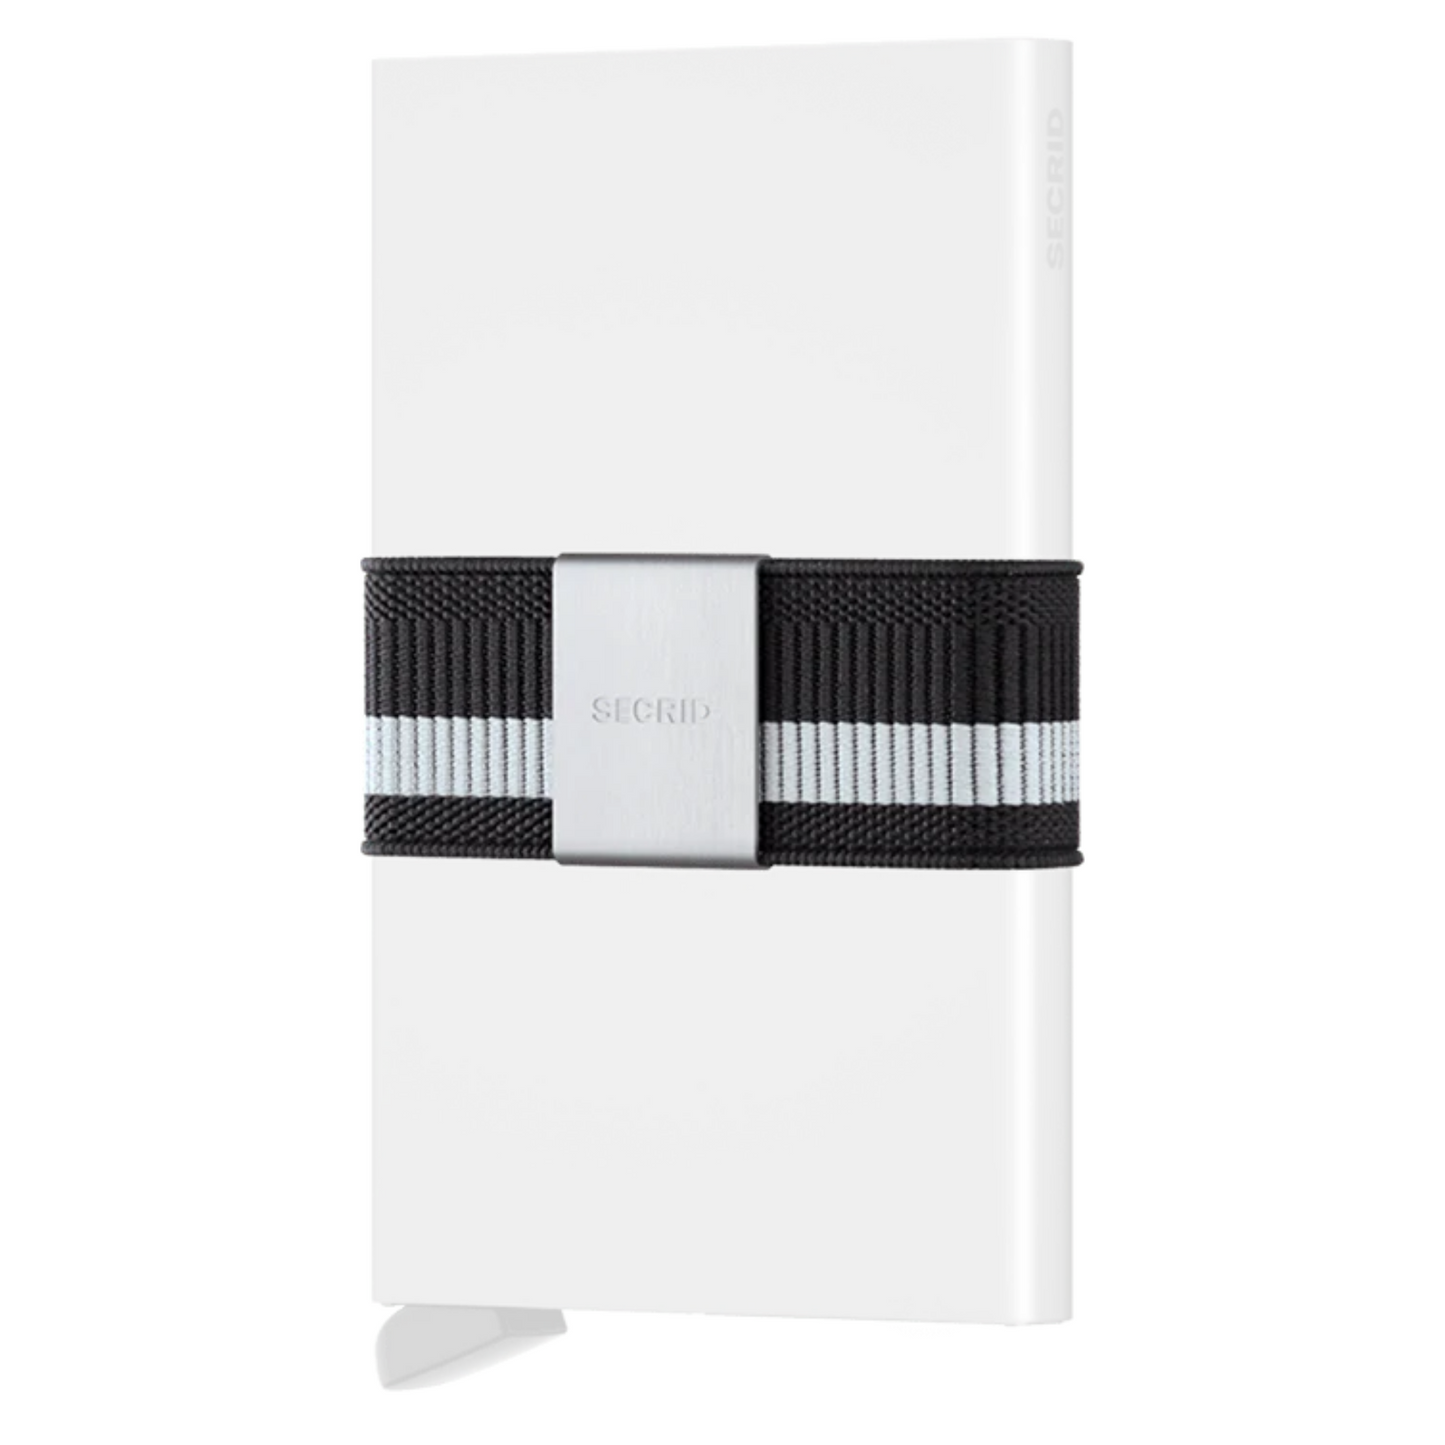 A black and white thick elastic band has a silver metal square attached.